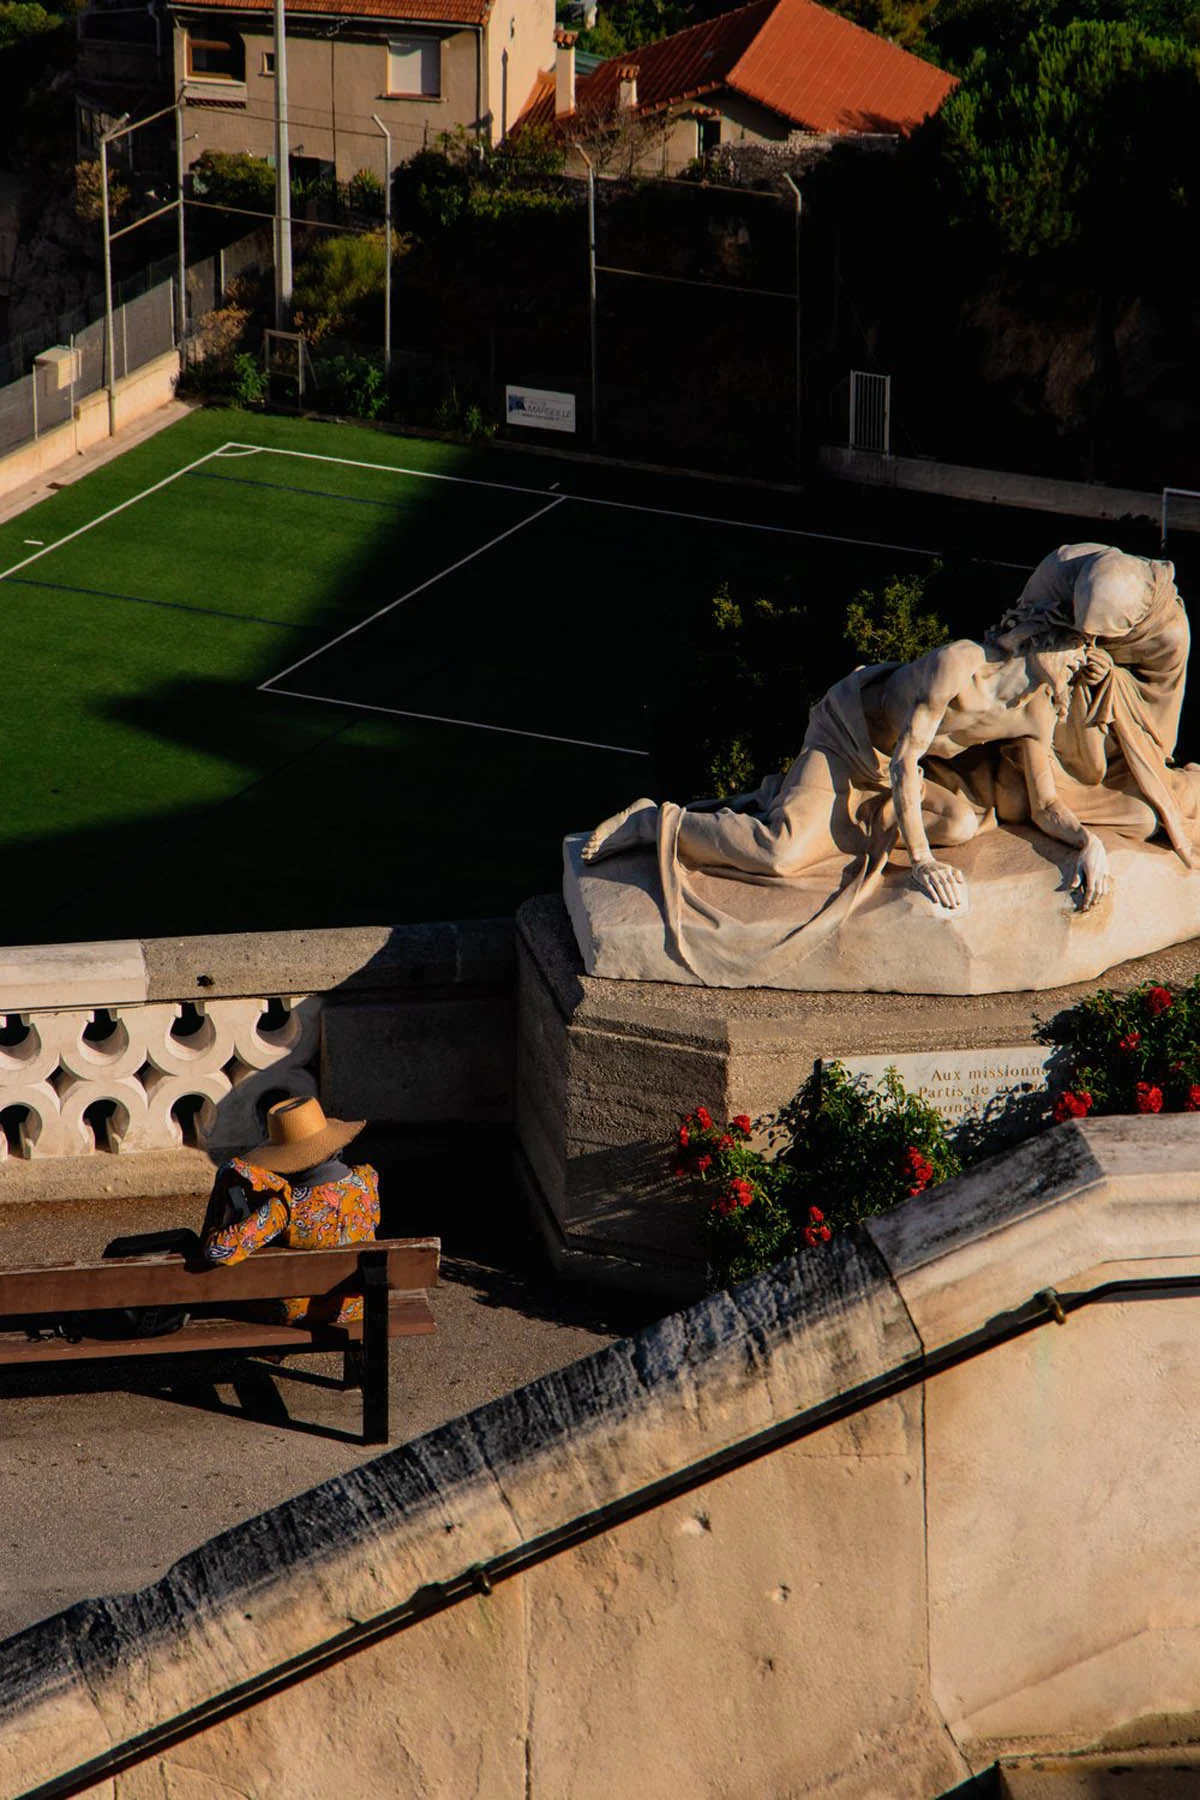 A photograph taken from a basilica with a woman wearing a straw hat and patterned long-sleeved T-shirt sitting on a bench next to a statue of Jesus and Veronica by the sculptor Auguste Carli facing a football pitch